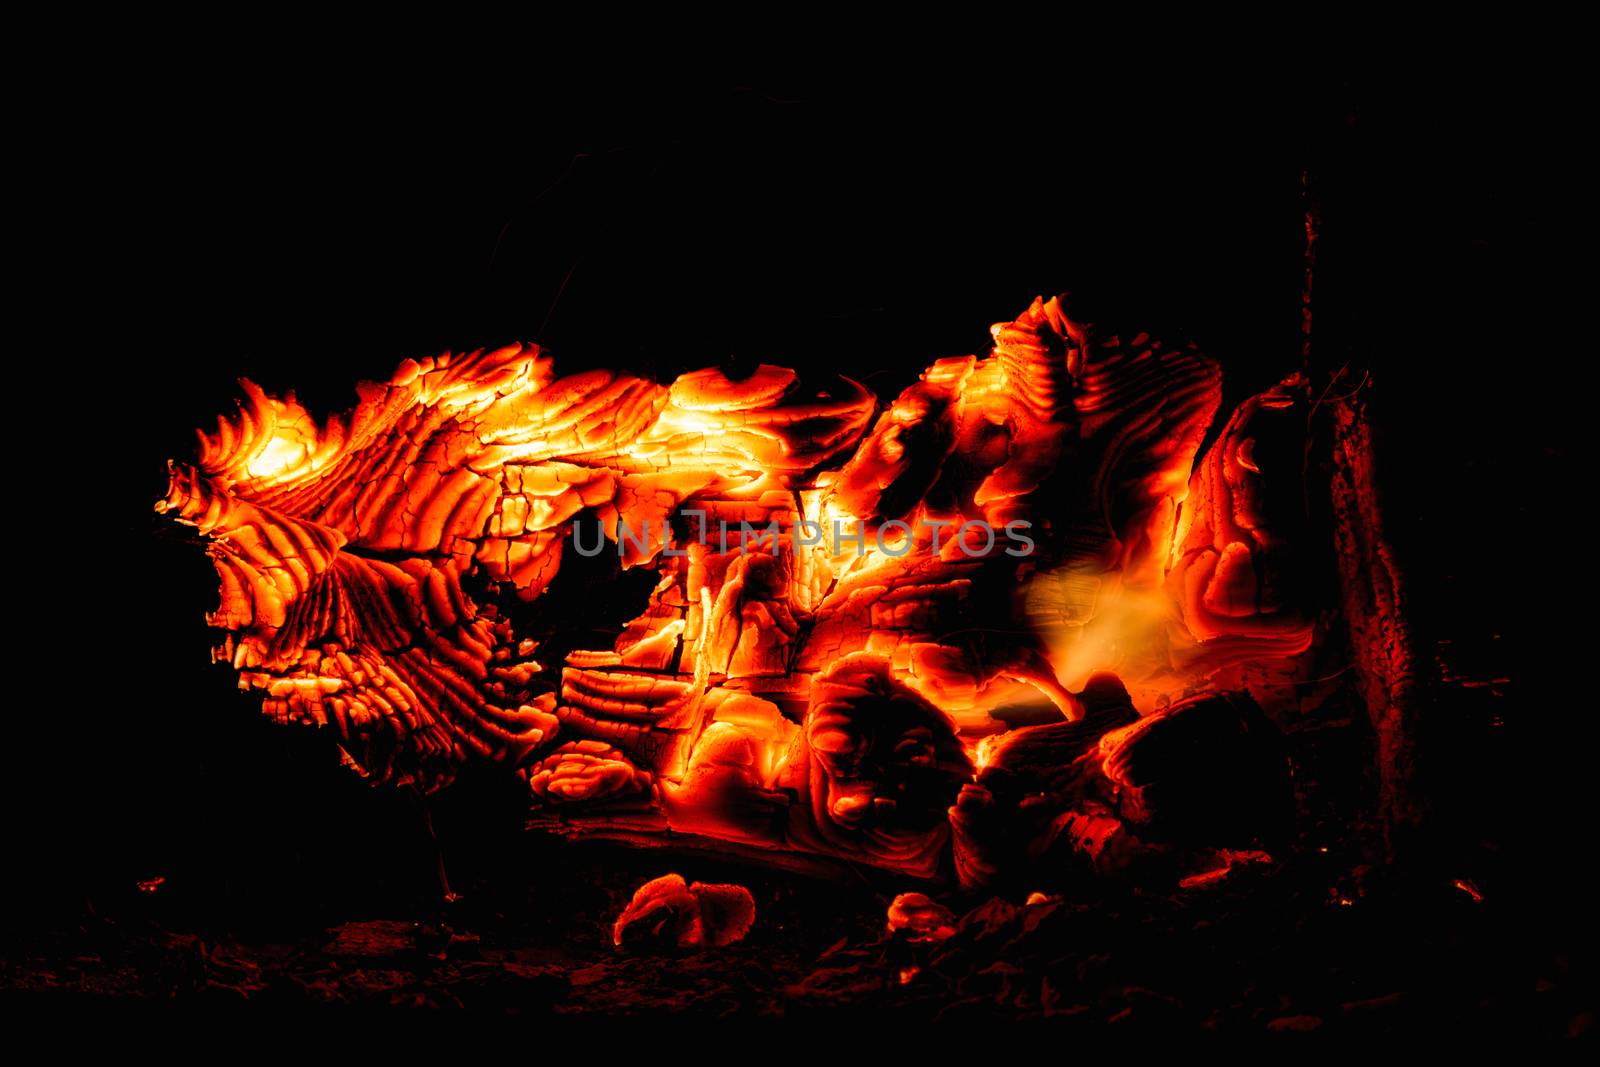 View of the fireplace with burning wood by sandra_fotodesign